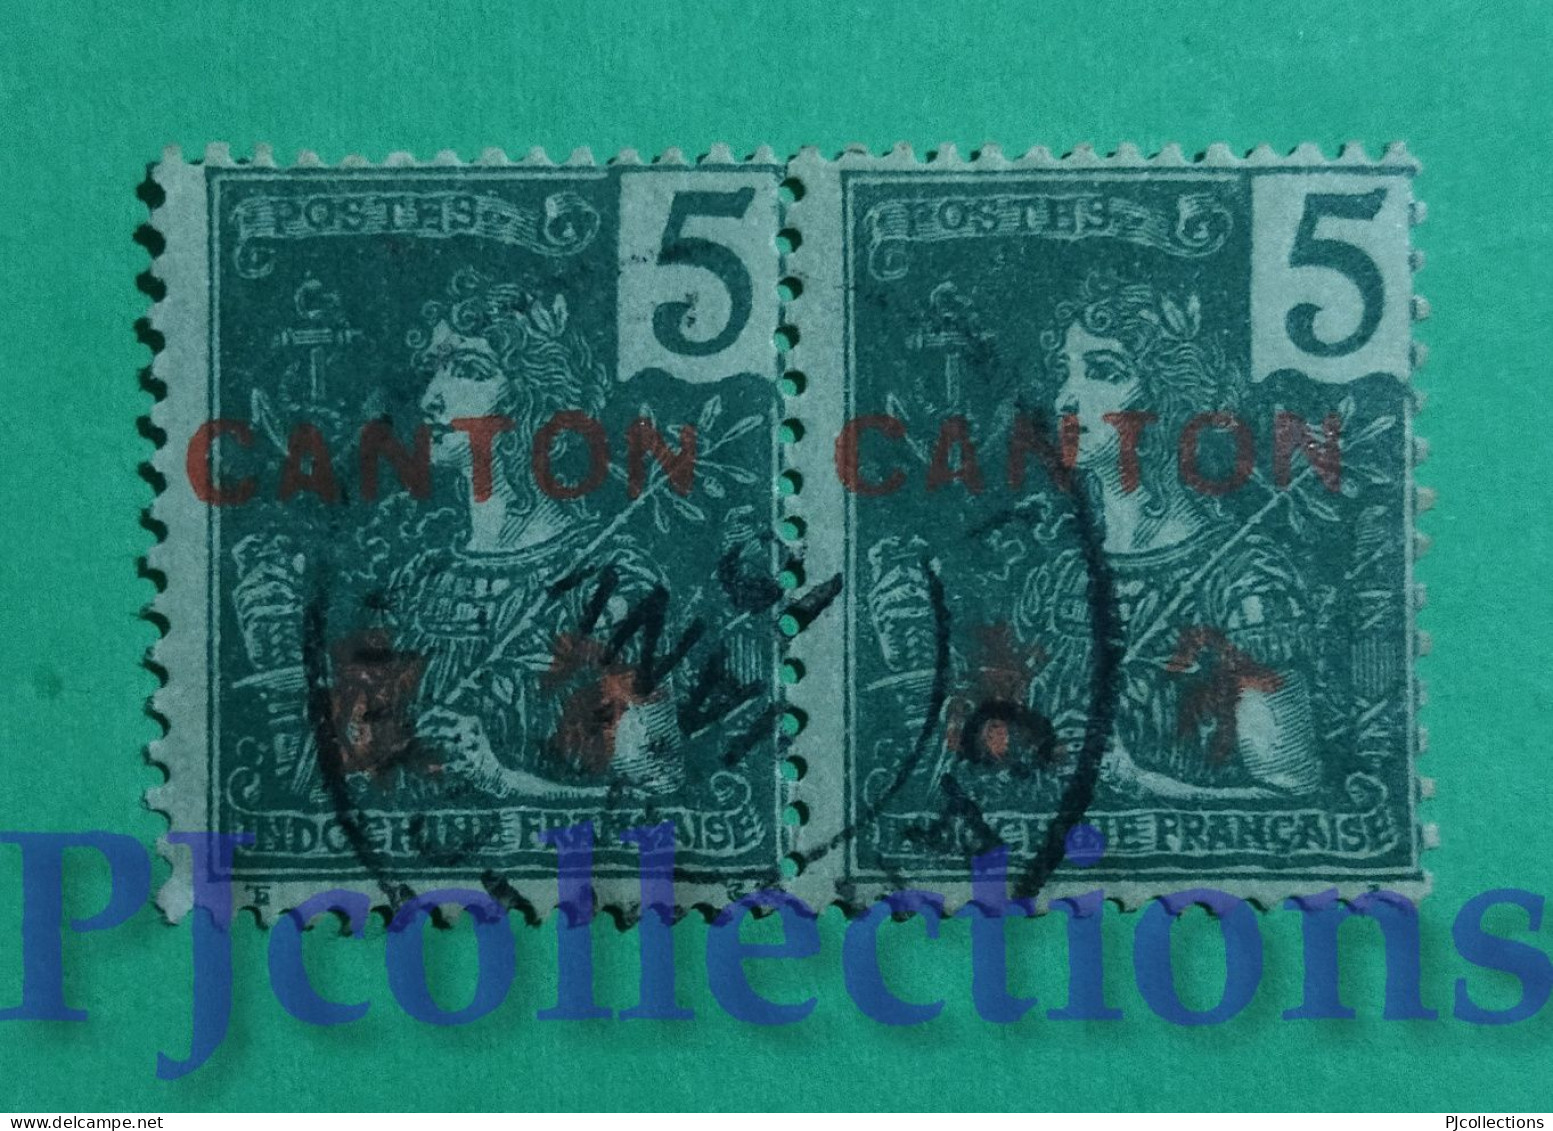 S786- FRENCH INDOCHINA CANTON 1907 OVERPRINTED 5c IN COPPIA - COUPLE USATI - USED - Gebraucht